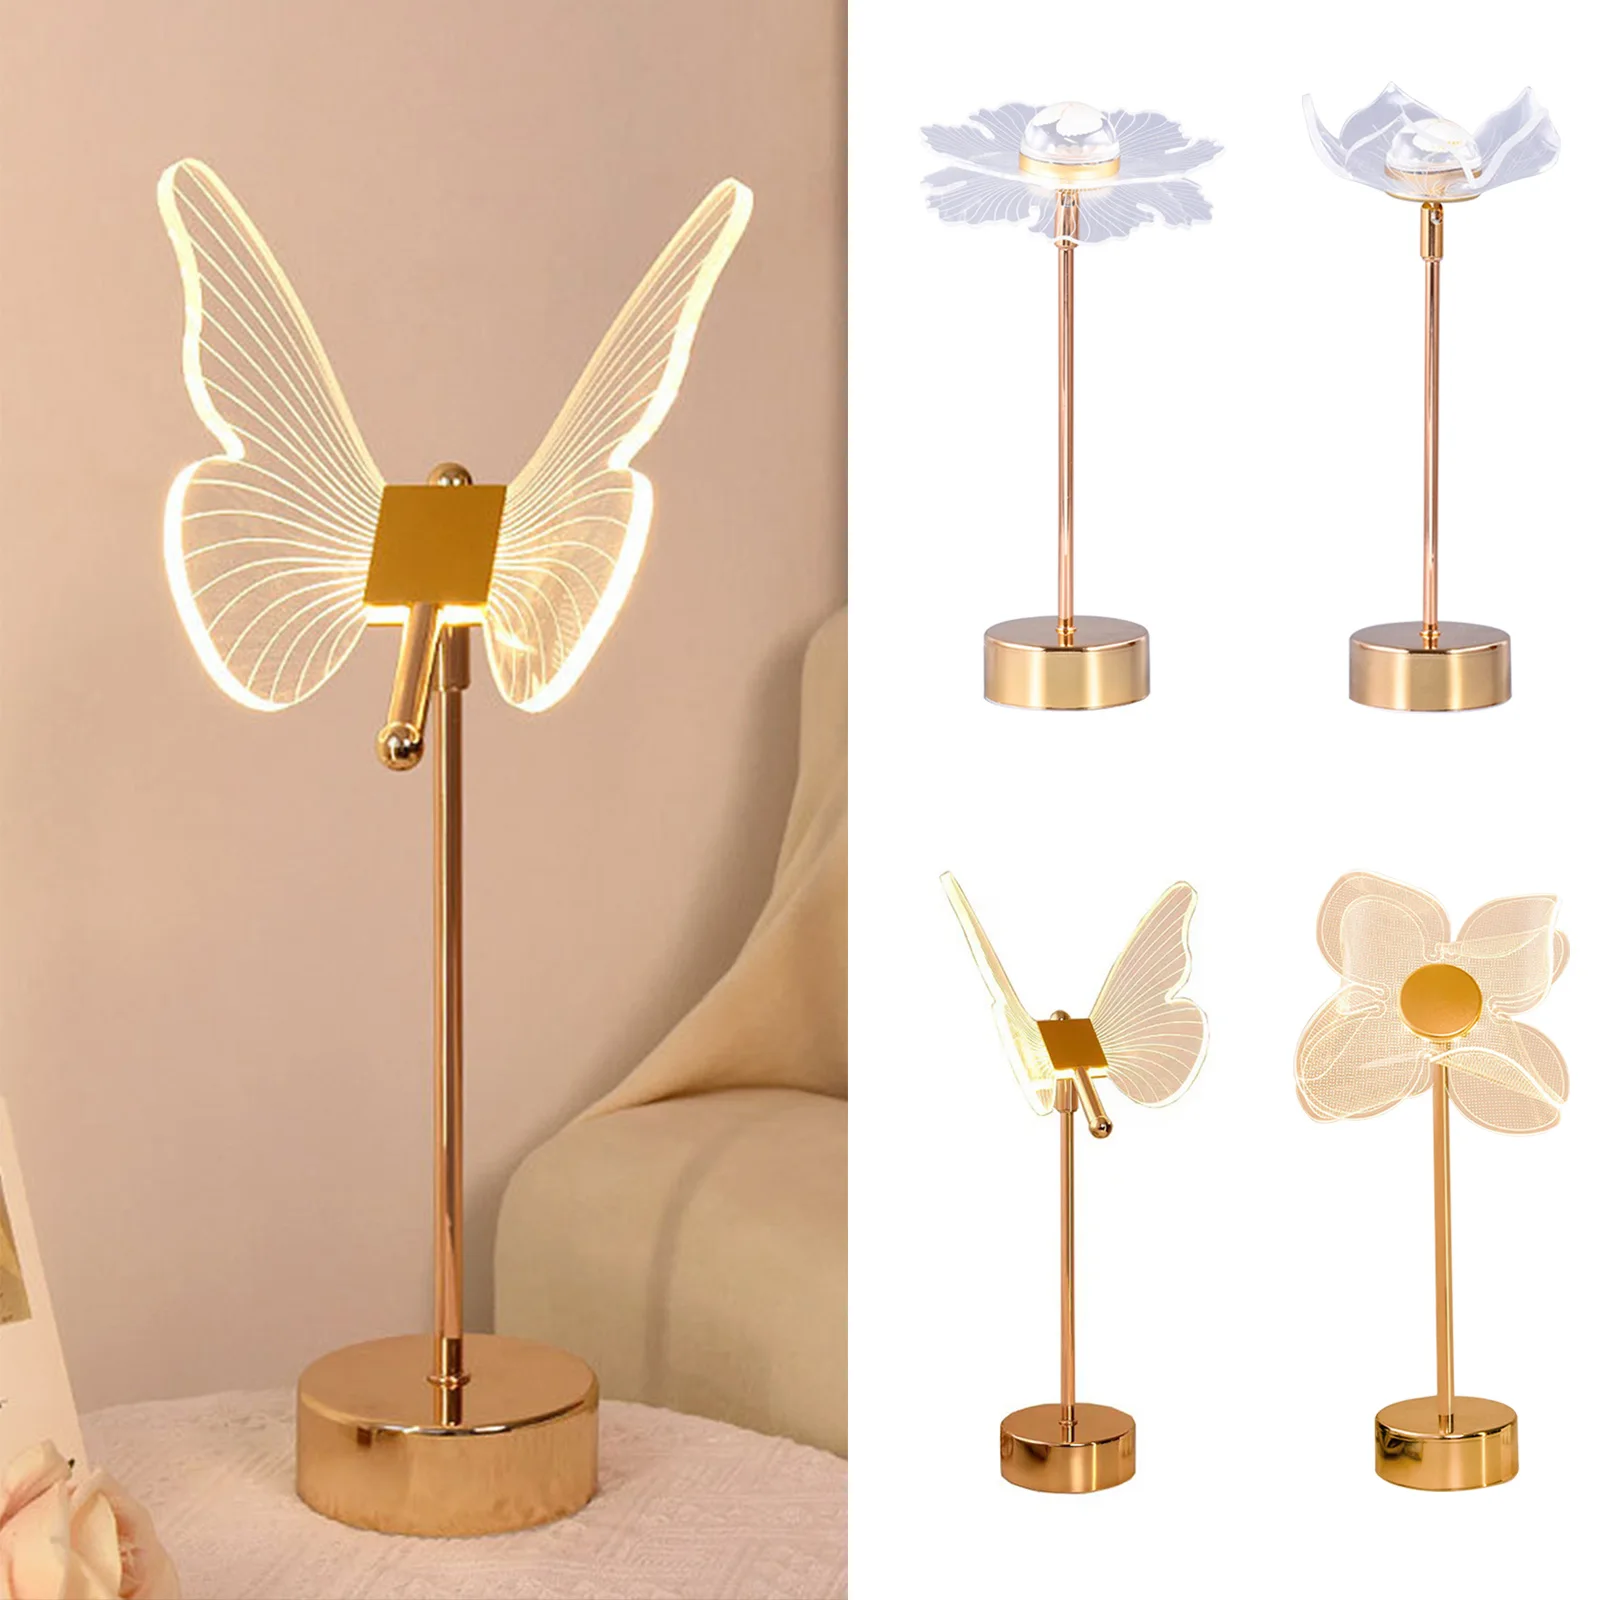 

Adjustable Lampshade LED Shell Table Light Acrylic Butterfly LED Art Crafts Acrylic Bedroom Desk Nightlamp Atmosphere Light